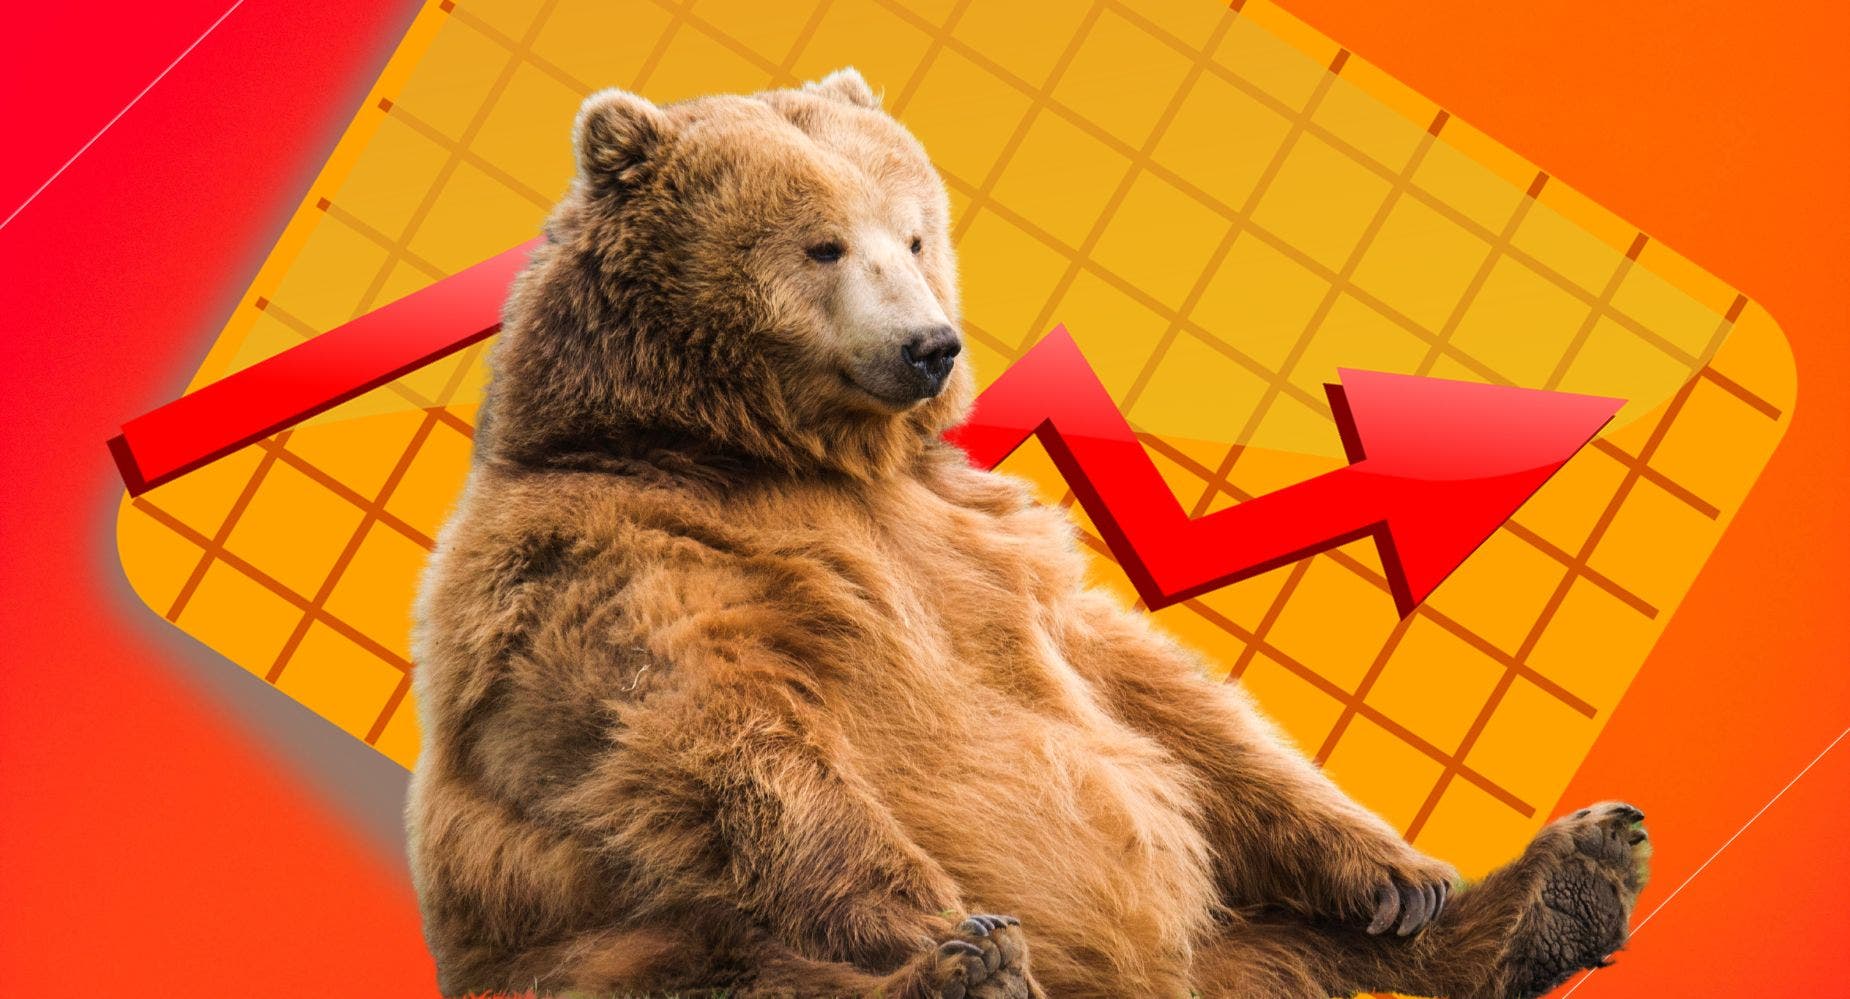 How Long Will The Crypto Bear Market Last? A Look At Previous Downturns